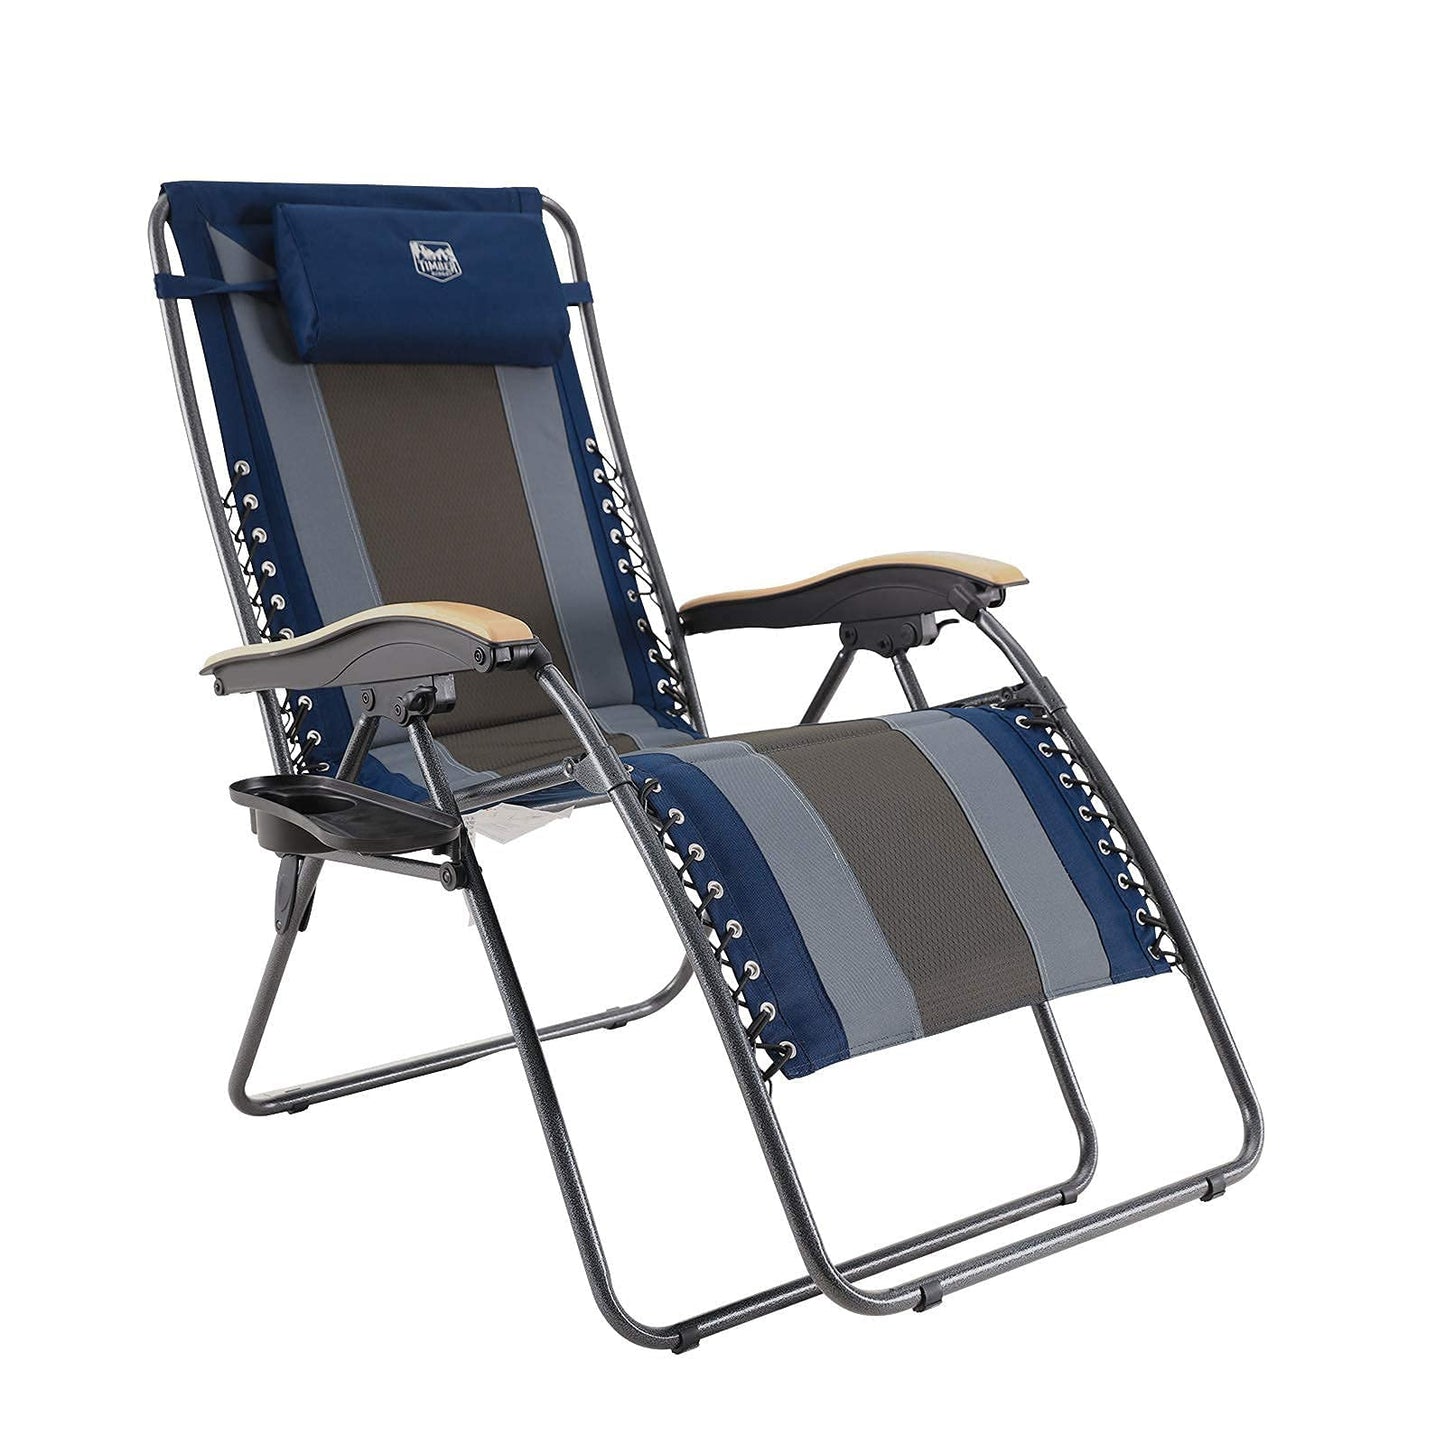 TIMBER RIDGE Oversized Zero Gravity Padded with Adjustable Headrest and Cup Holder Outdoor Reclining Chairs XXL for Lawn, Camping, Patio, Support up to 350 LBS, Blue